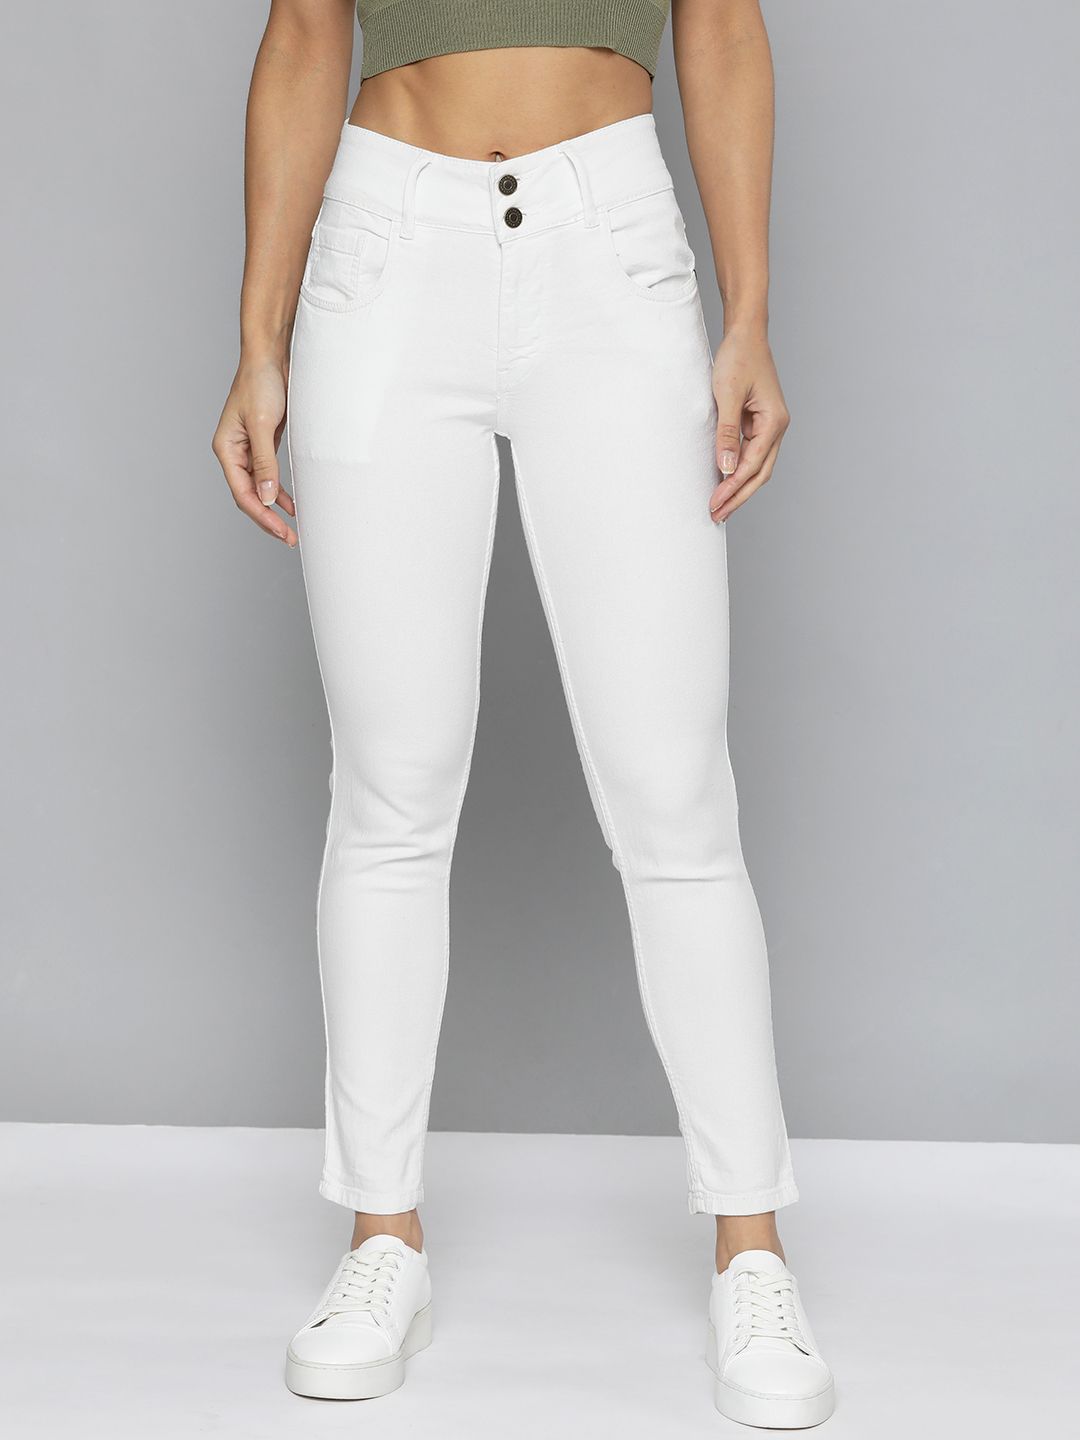 Harvard Women White Skinny Fit Stretchable Jeans Price in India